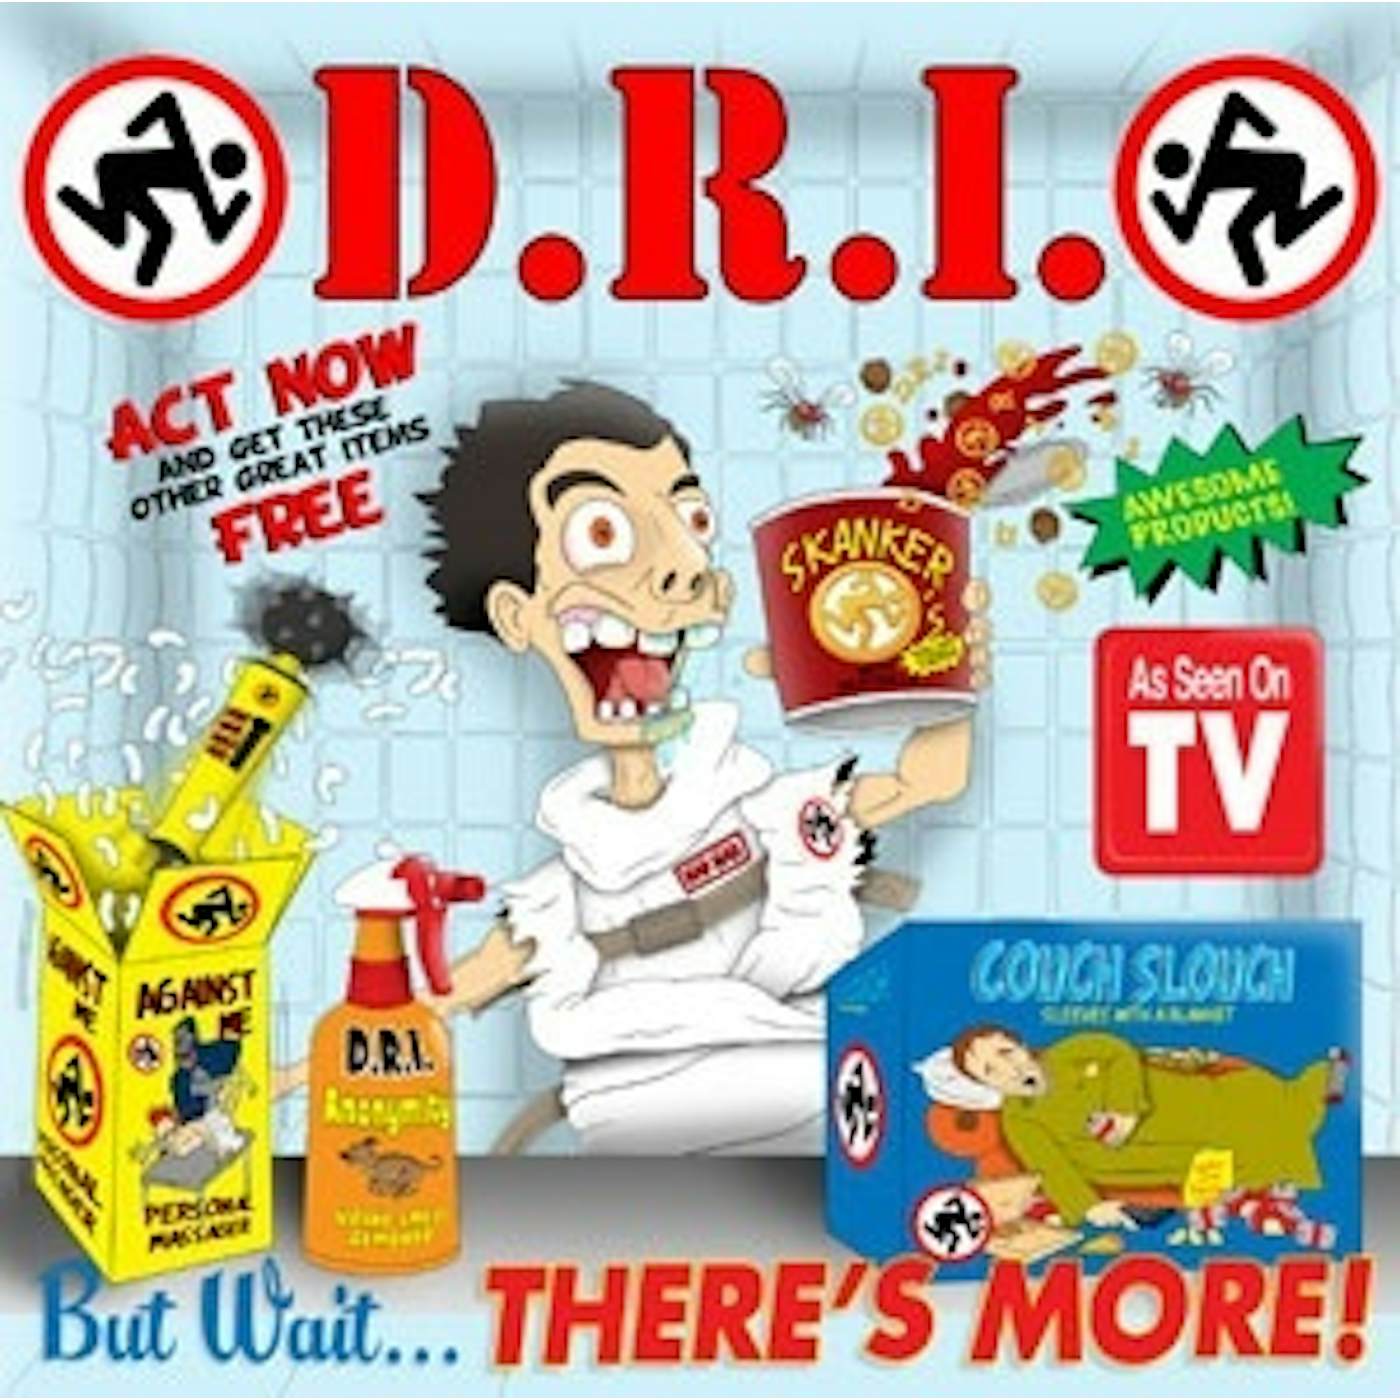 D.R.I. BUT WAIT THERE'S MORE! CD